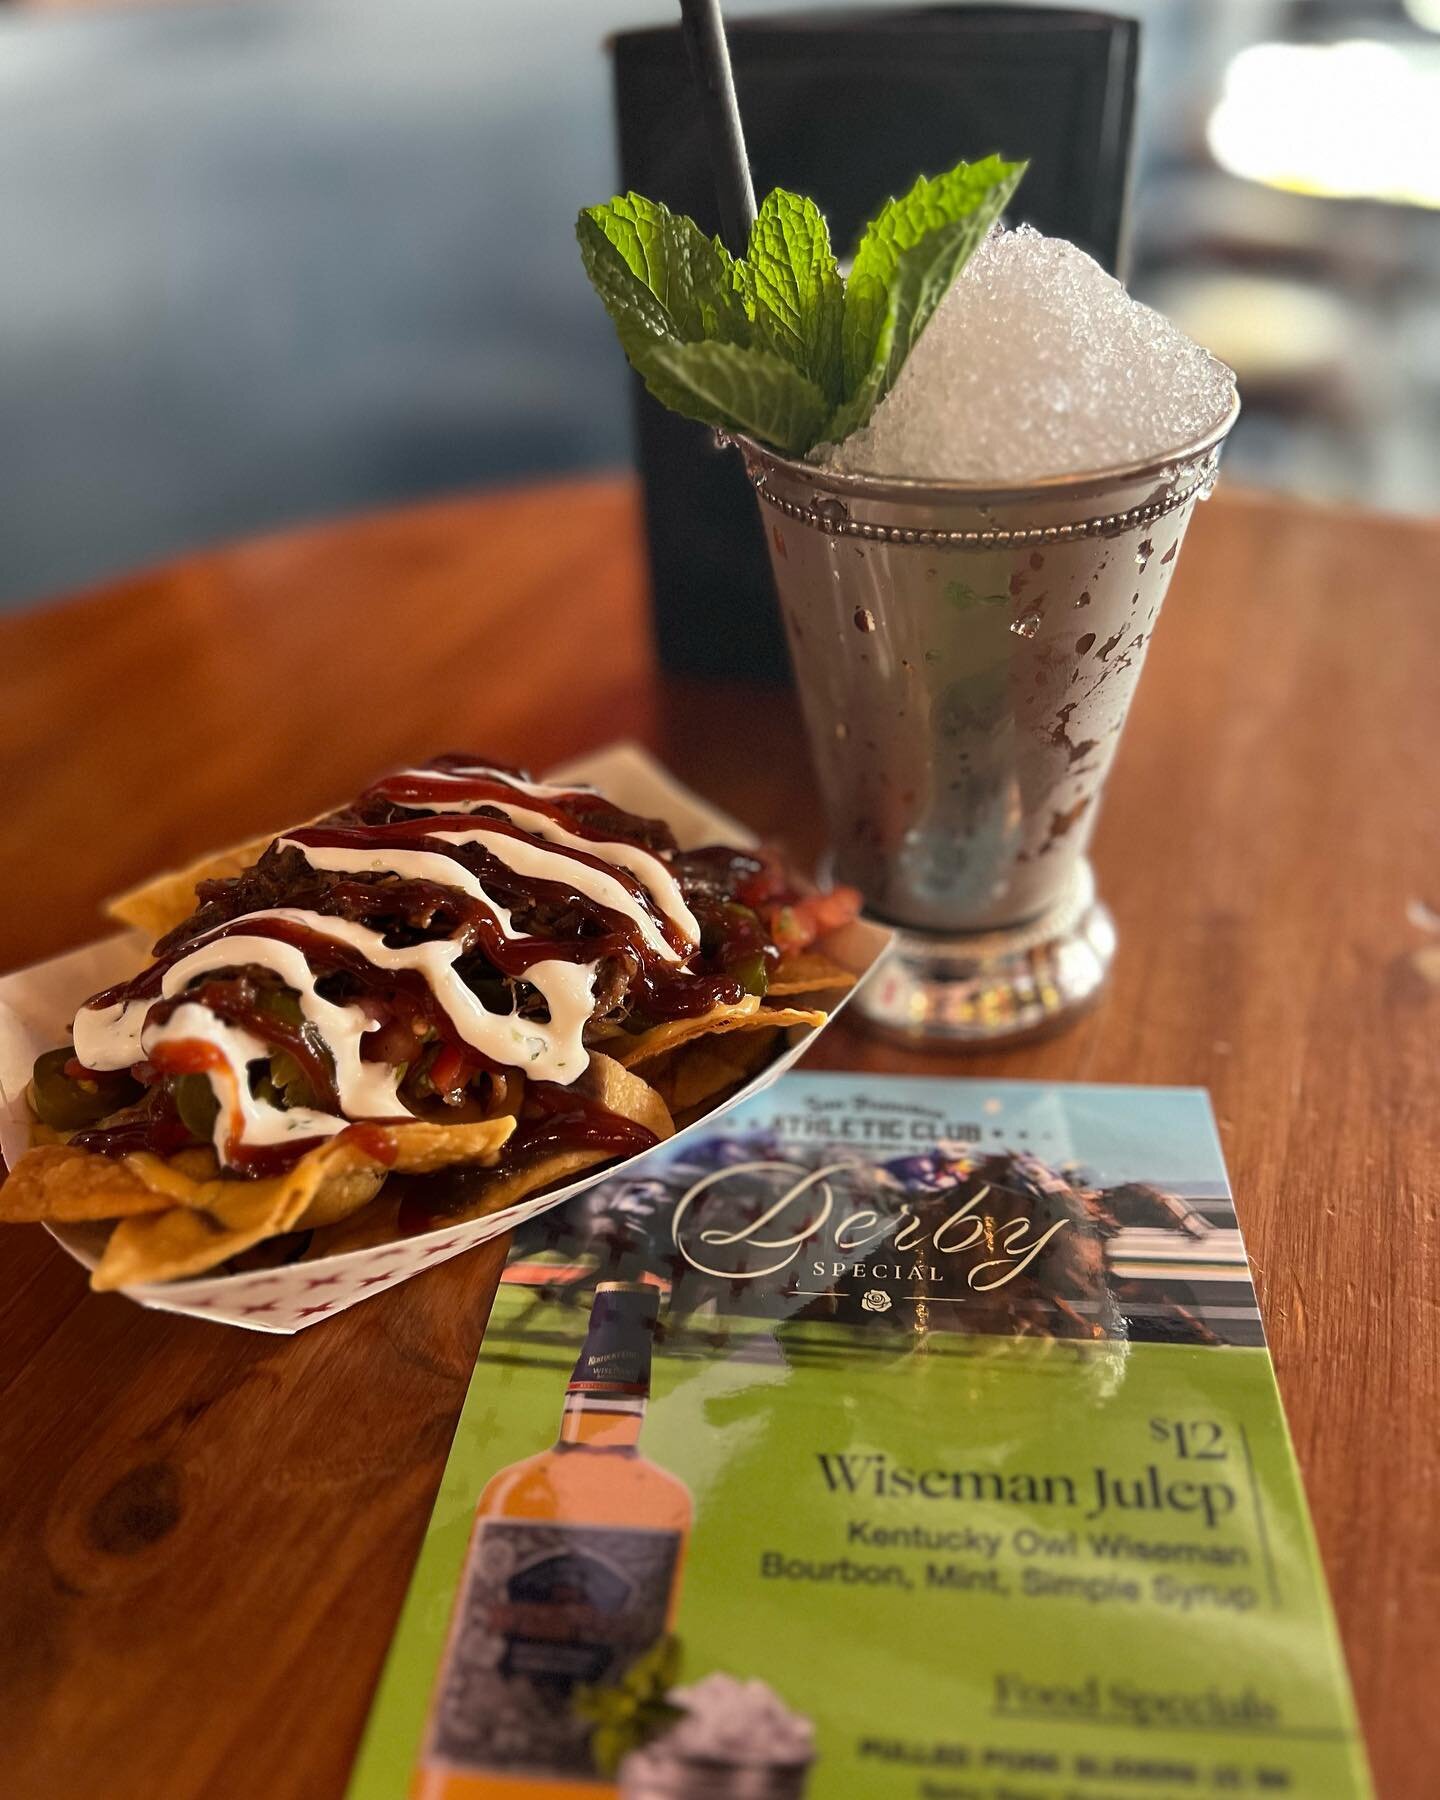 It&rsquo;s derby day!  Join us for some Kentucky nachos and a Wiseman bourbon mint julep!  Available today until 4pm.  Then stick around for the warriors vs. lakers at 5:30! @thesfac @el____burro #kentuckyderby #mintjulep #kentuckynachos #wisemanbour